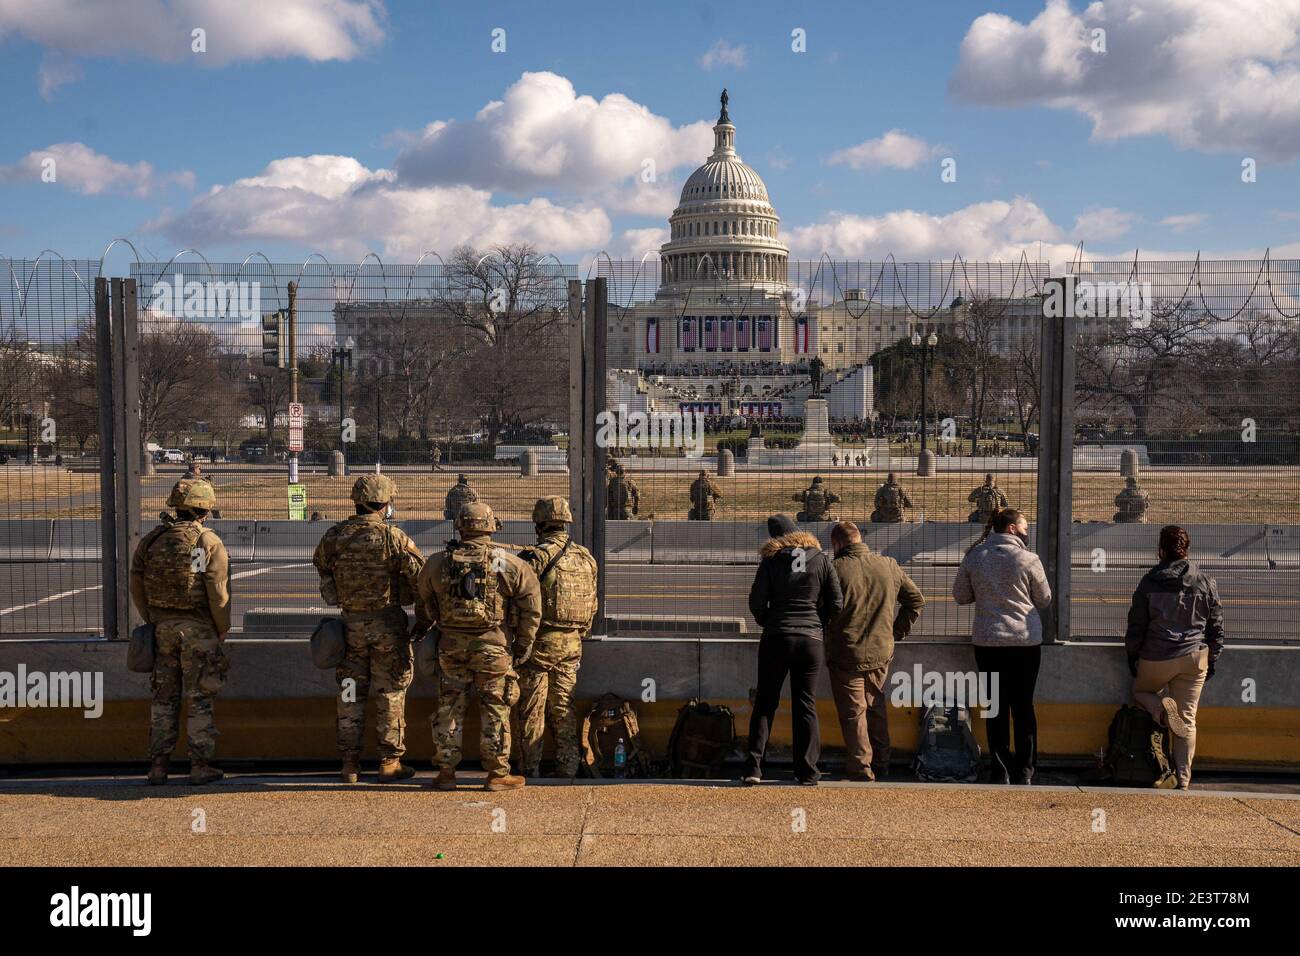 Washington, United States. 20th Jan, 2021. Members of the Minnesota National Guard listen as President Joseph Robinette Biden Jr. speaks to the Nation after he took the oath of office as the 46th President of the United States at the Capitol in Washington, DC on Wednesday, January 20, 2021. Photo by Ken Cedeno/UPI Credit: UPI/Alamy Live News Stock Photo